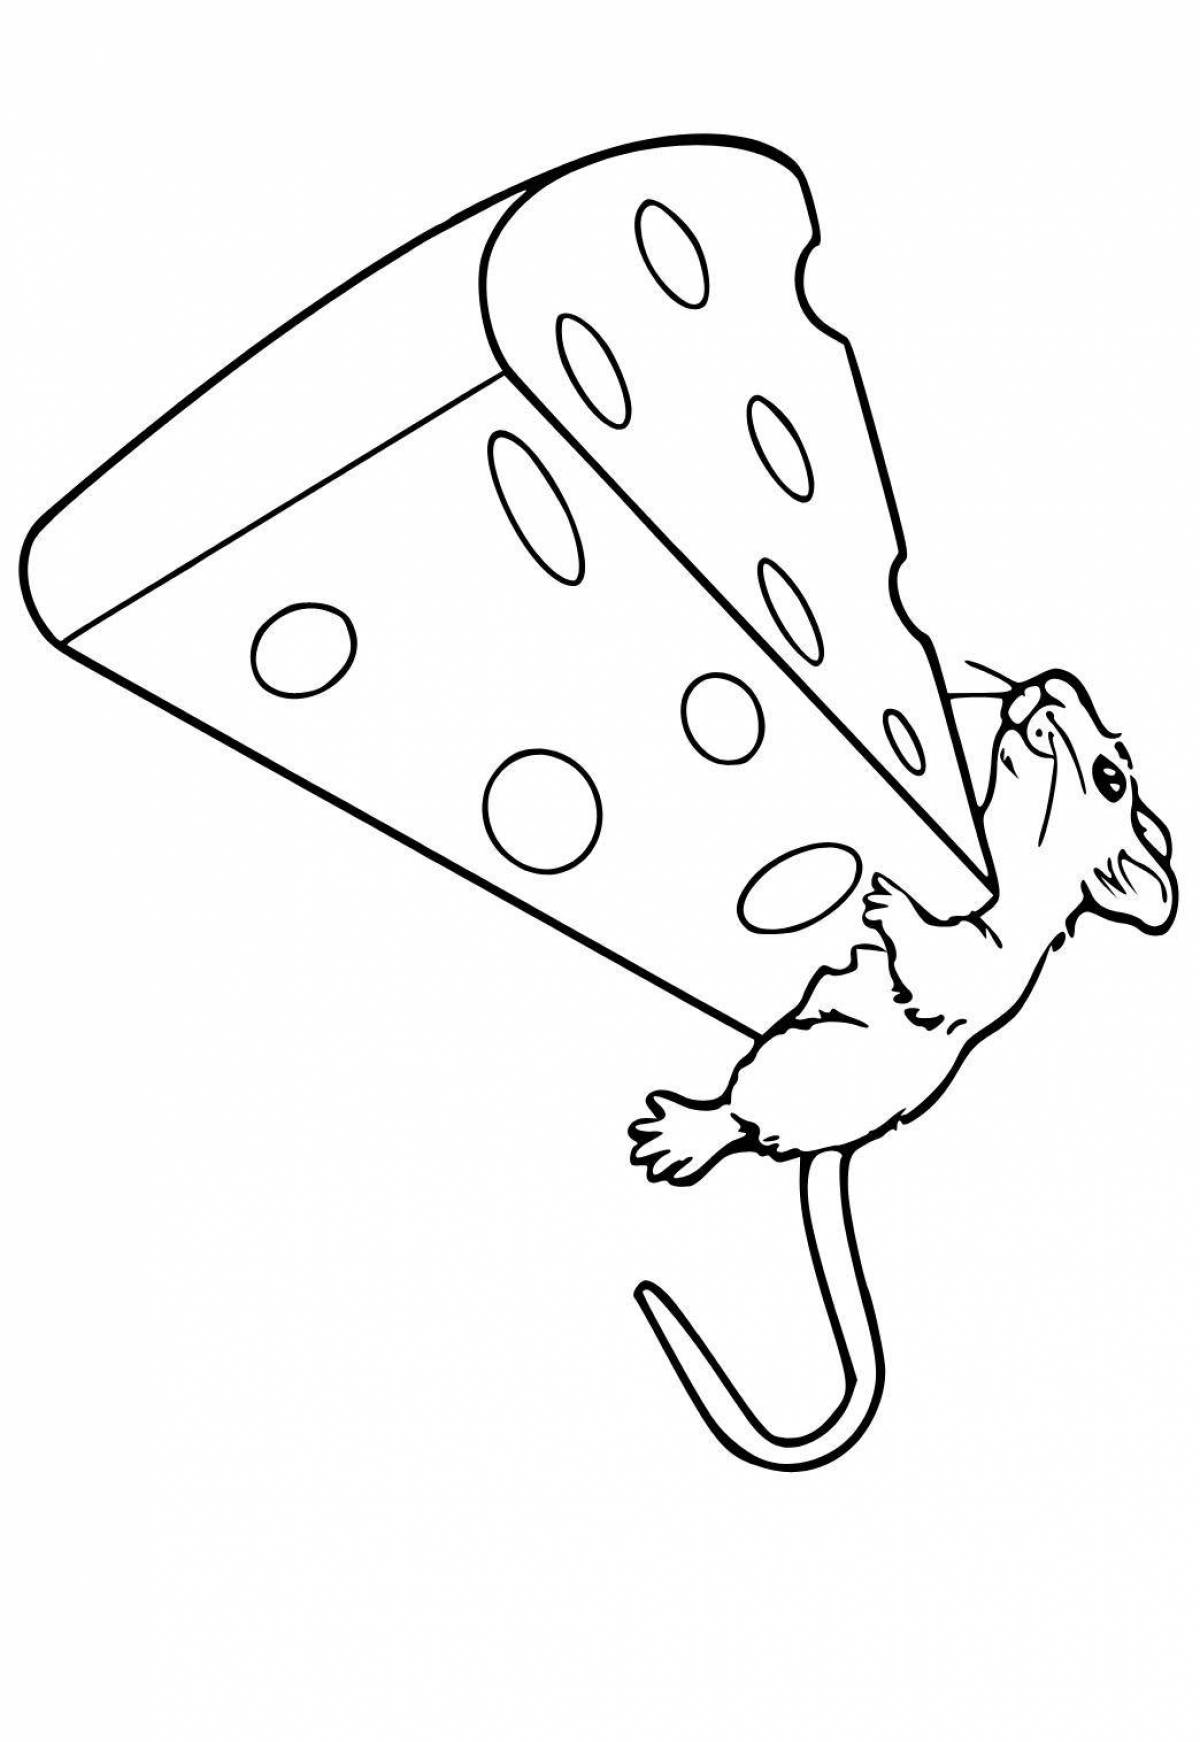 Humorous mouse with cheese coloring book